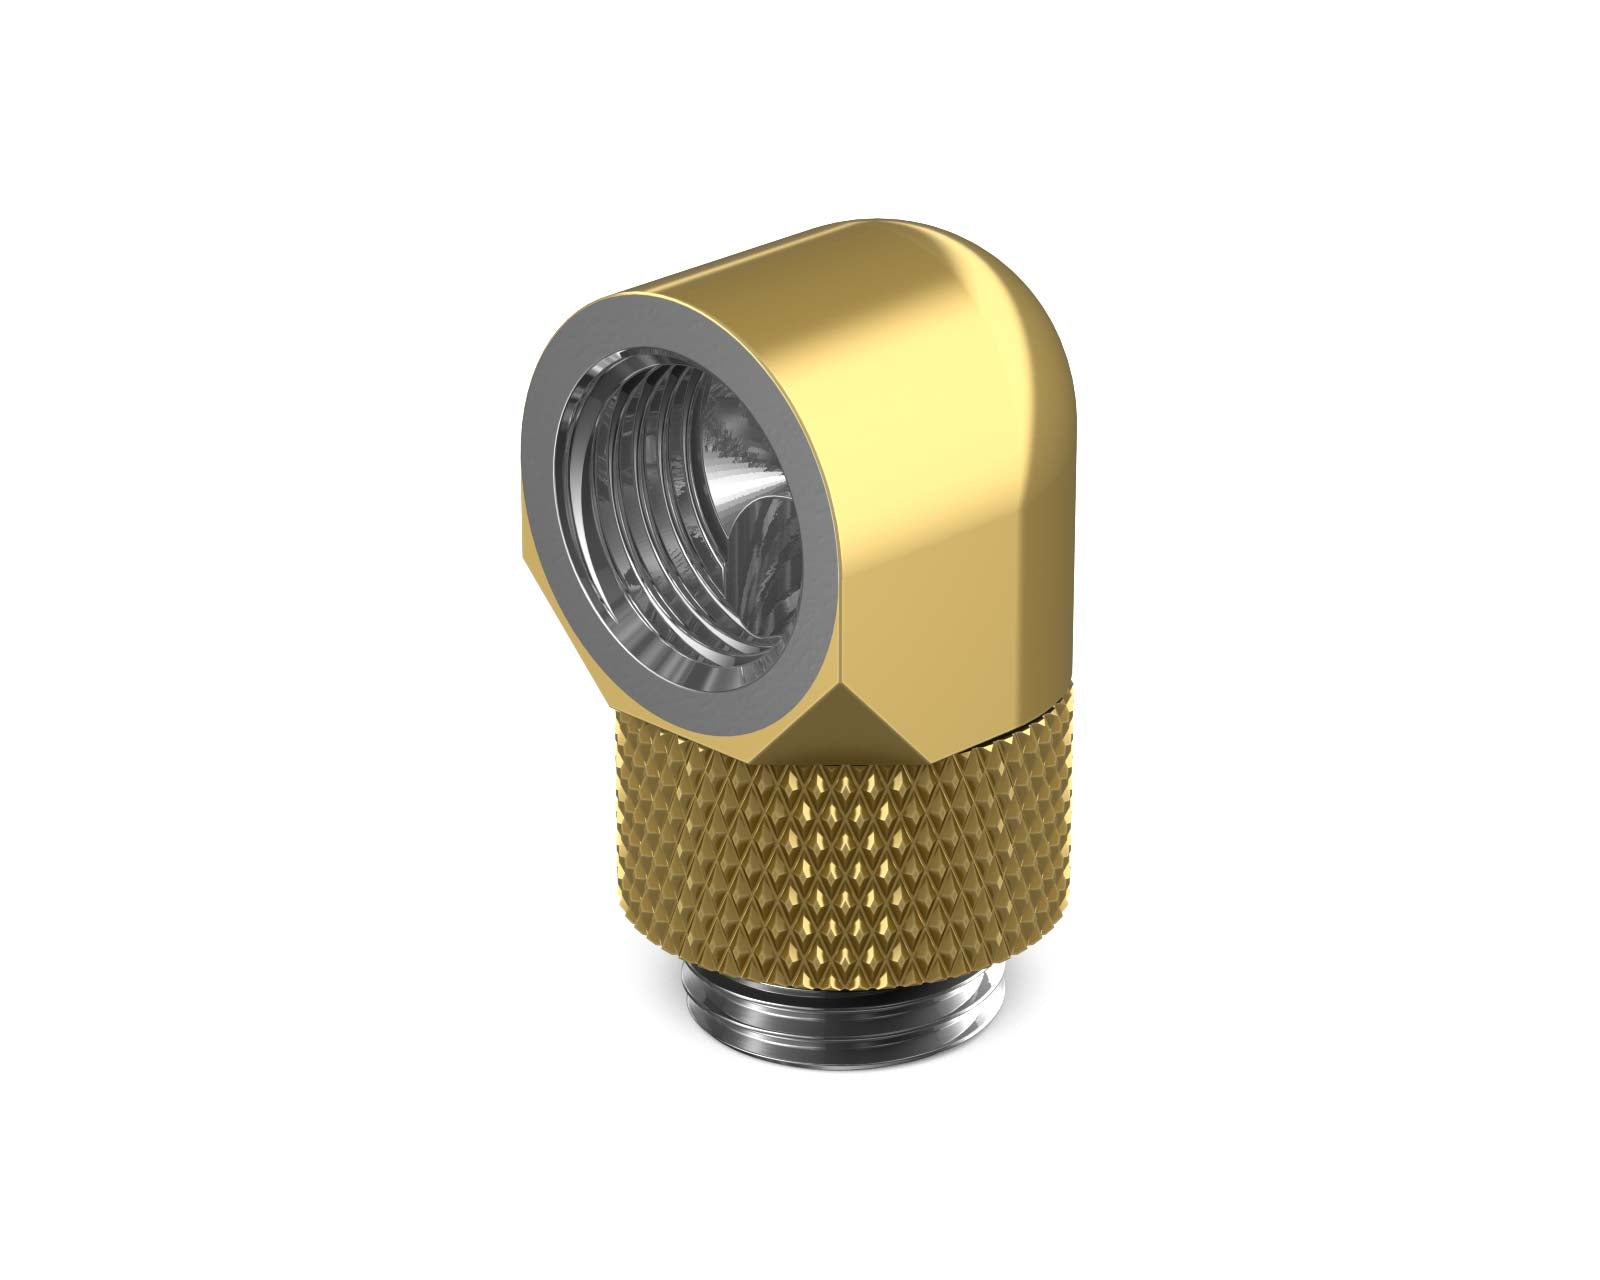 PrimoChill Male to Female G 1/4in. 90 Degree SX Rotary Elbow Fitting - PrimoChill - KEEPING IT COOL Candy Gold